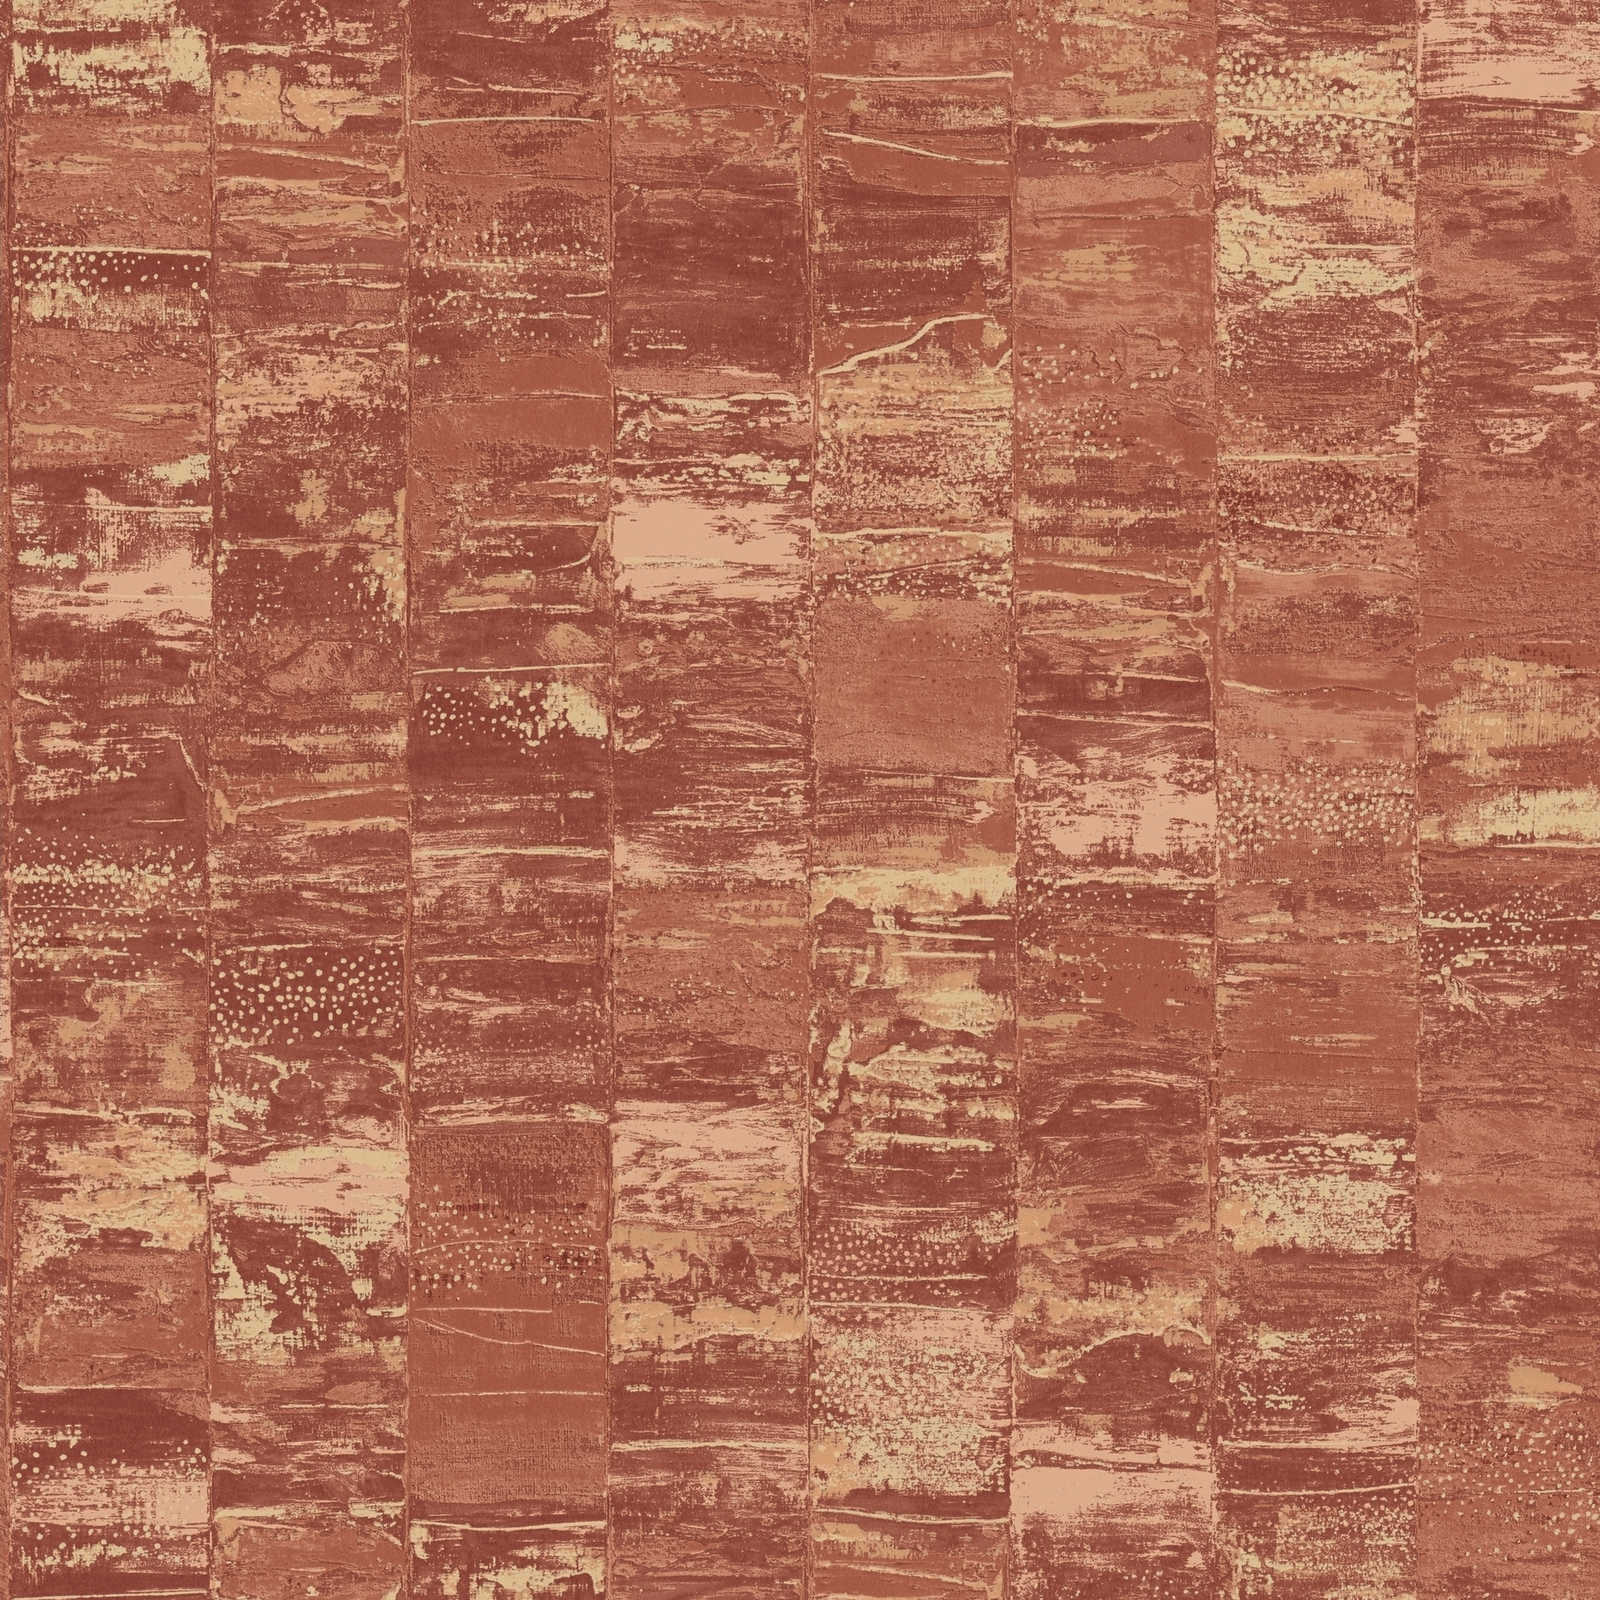 Non-woven wallpaper rust red with structure design in used look - red, brown
